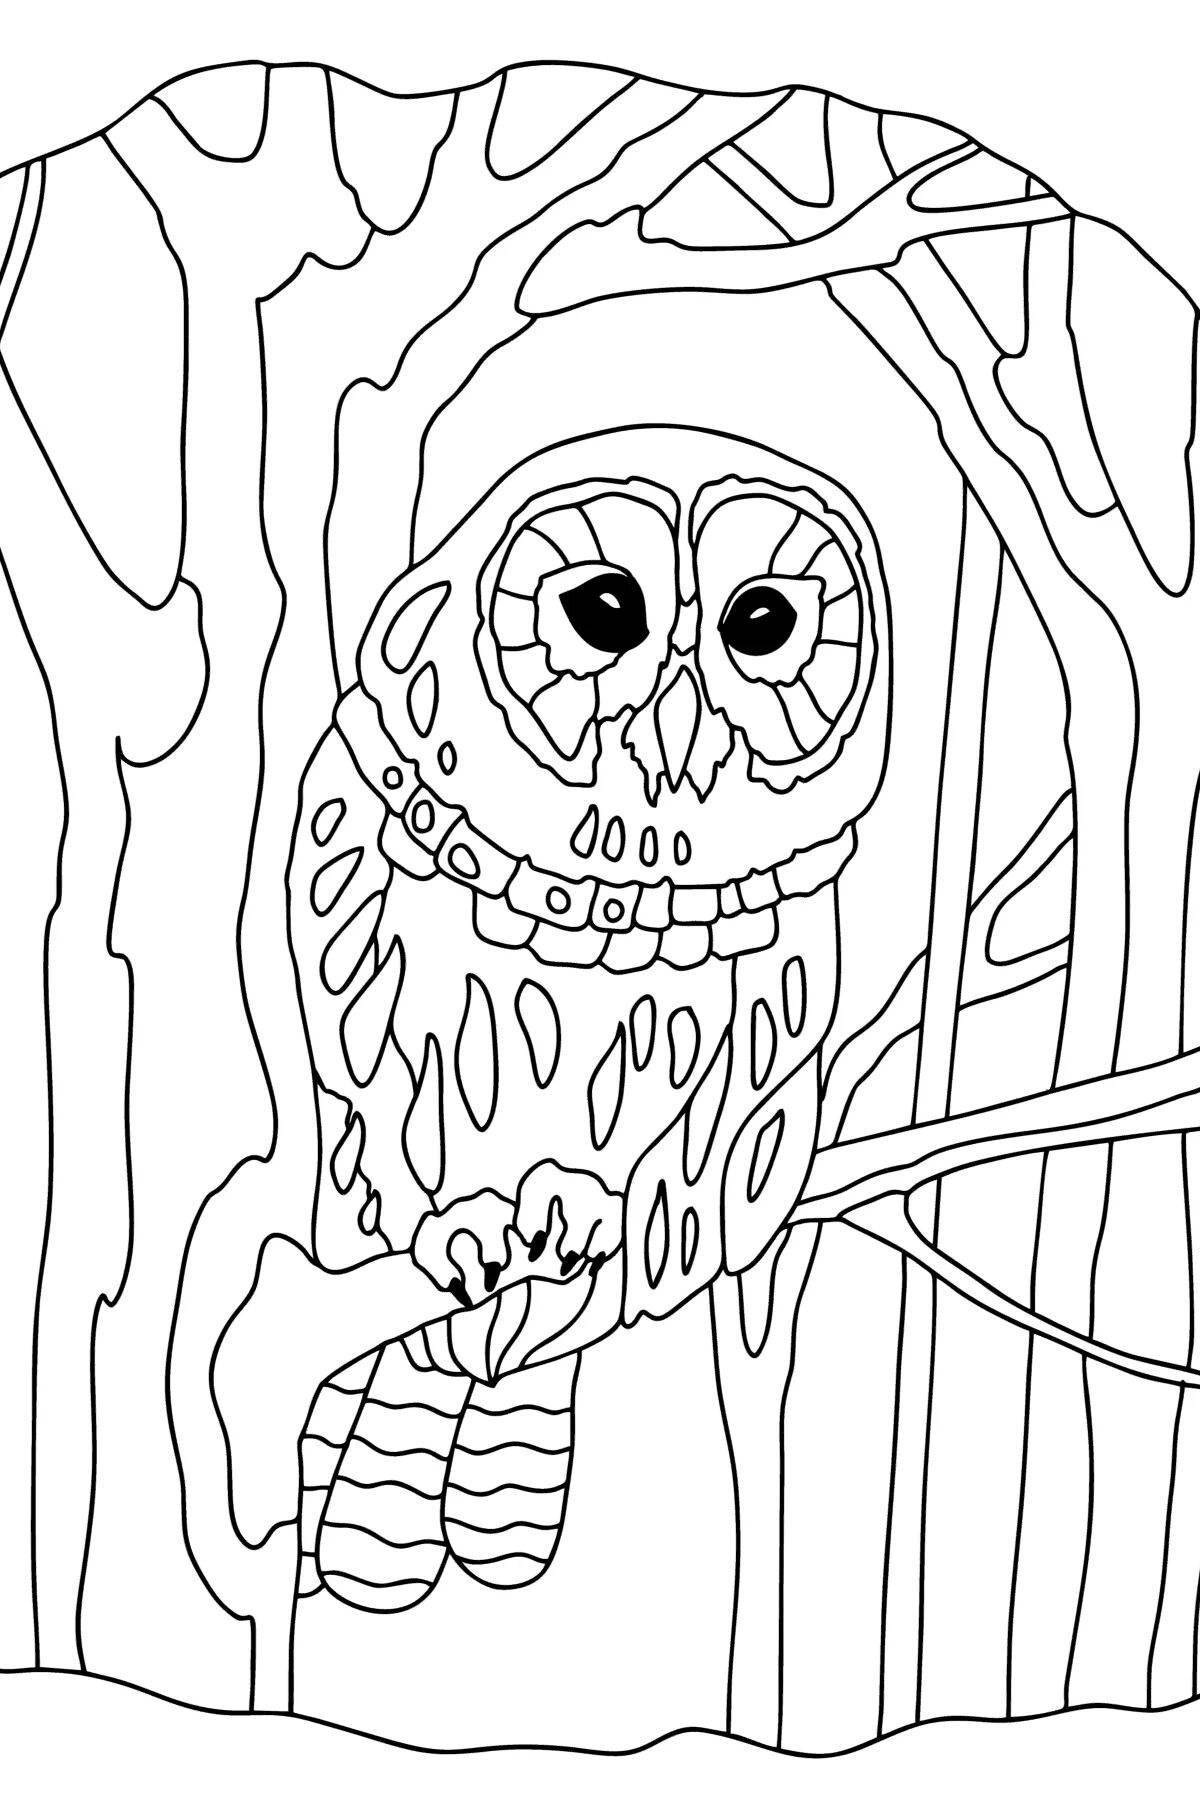 Glitter Owl Coloring in the Hollow